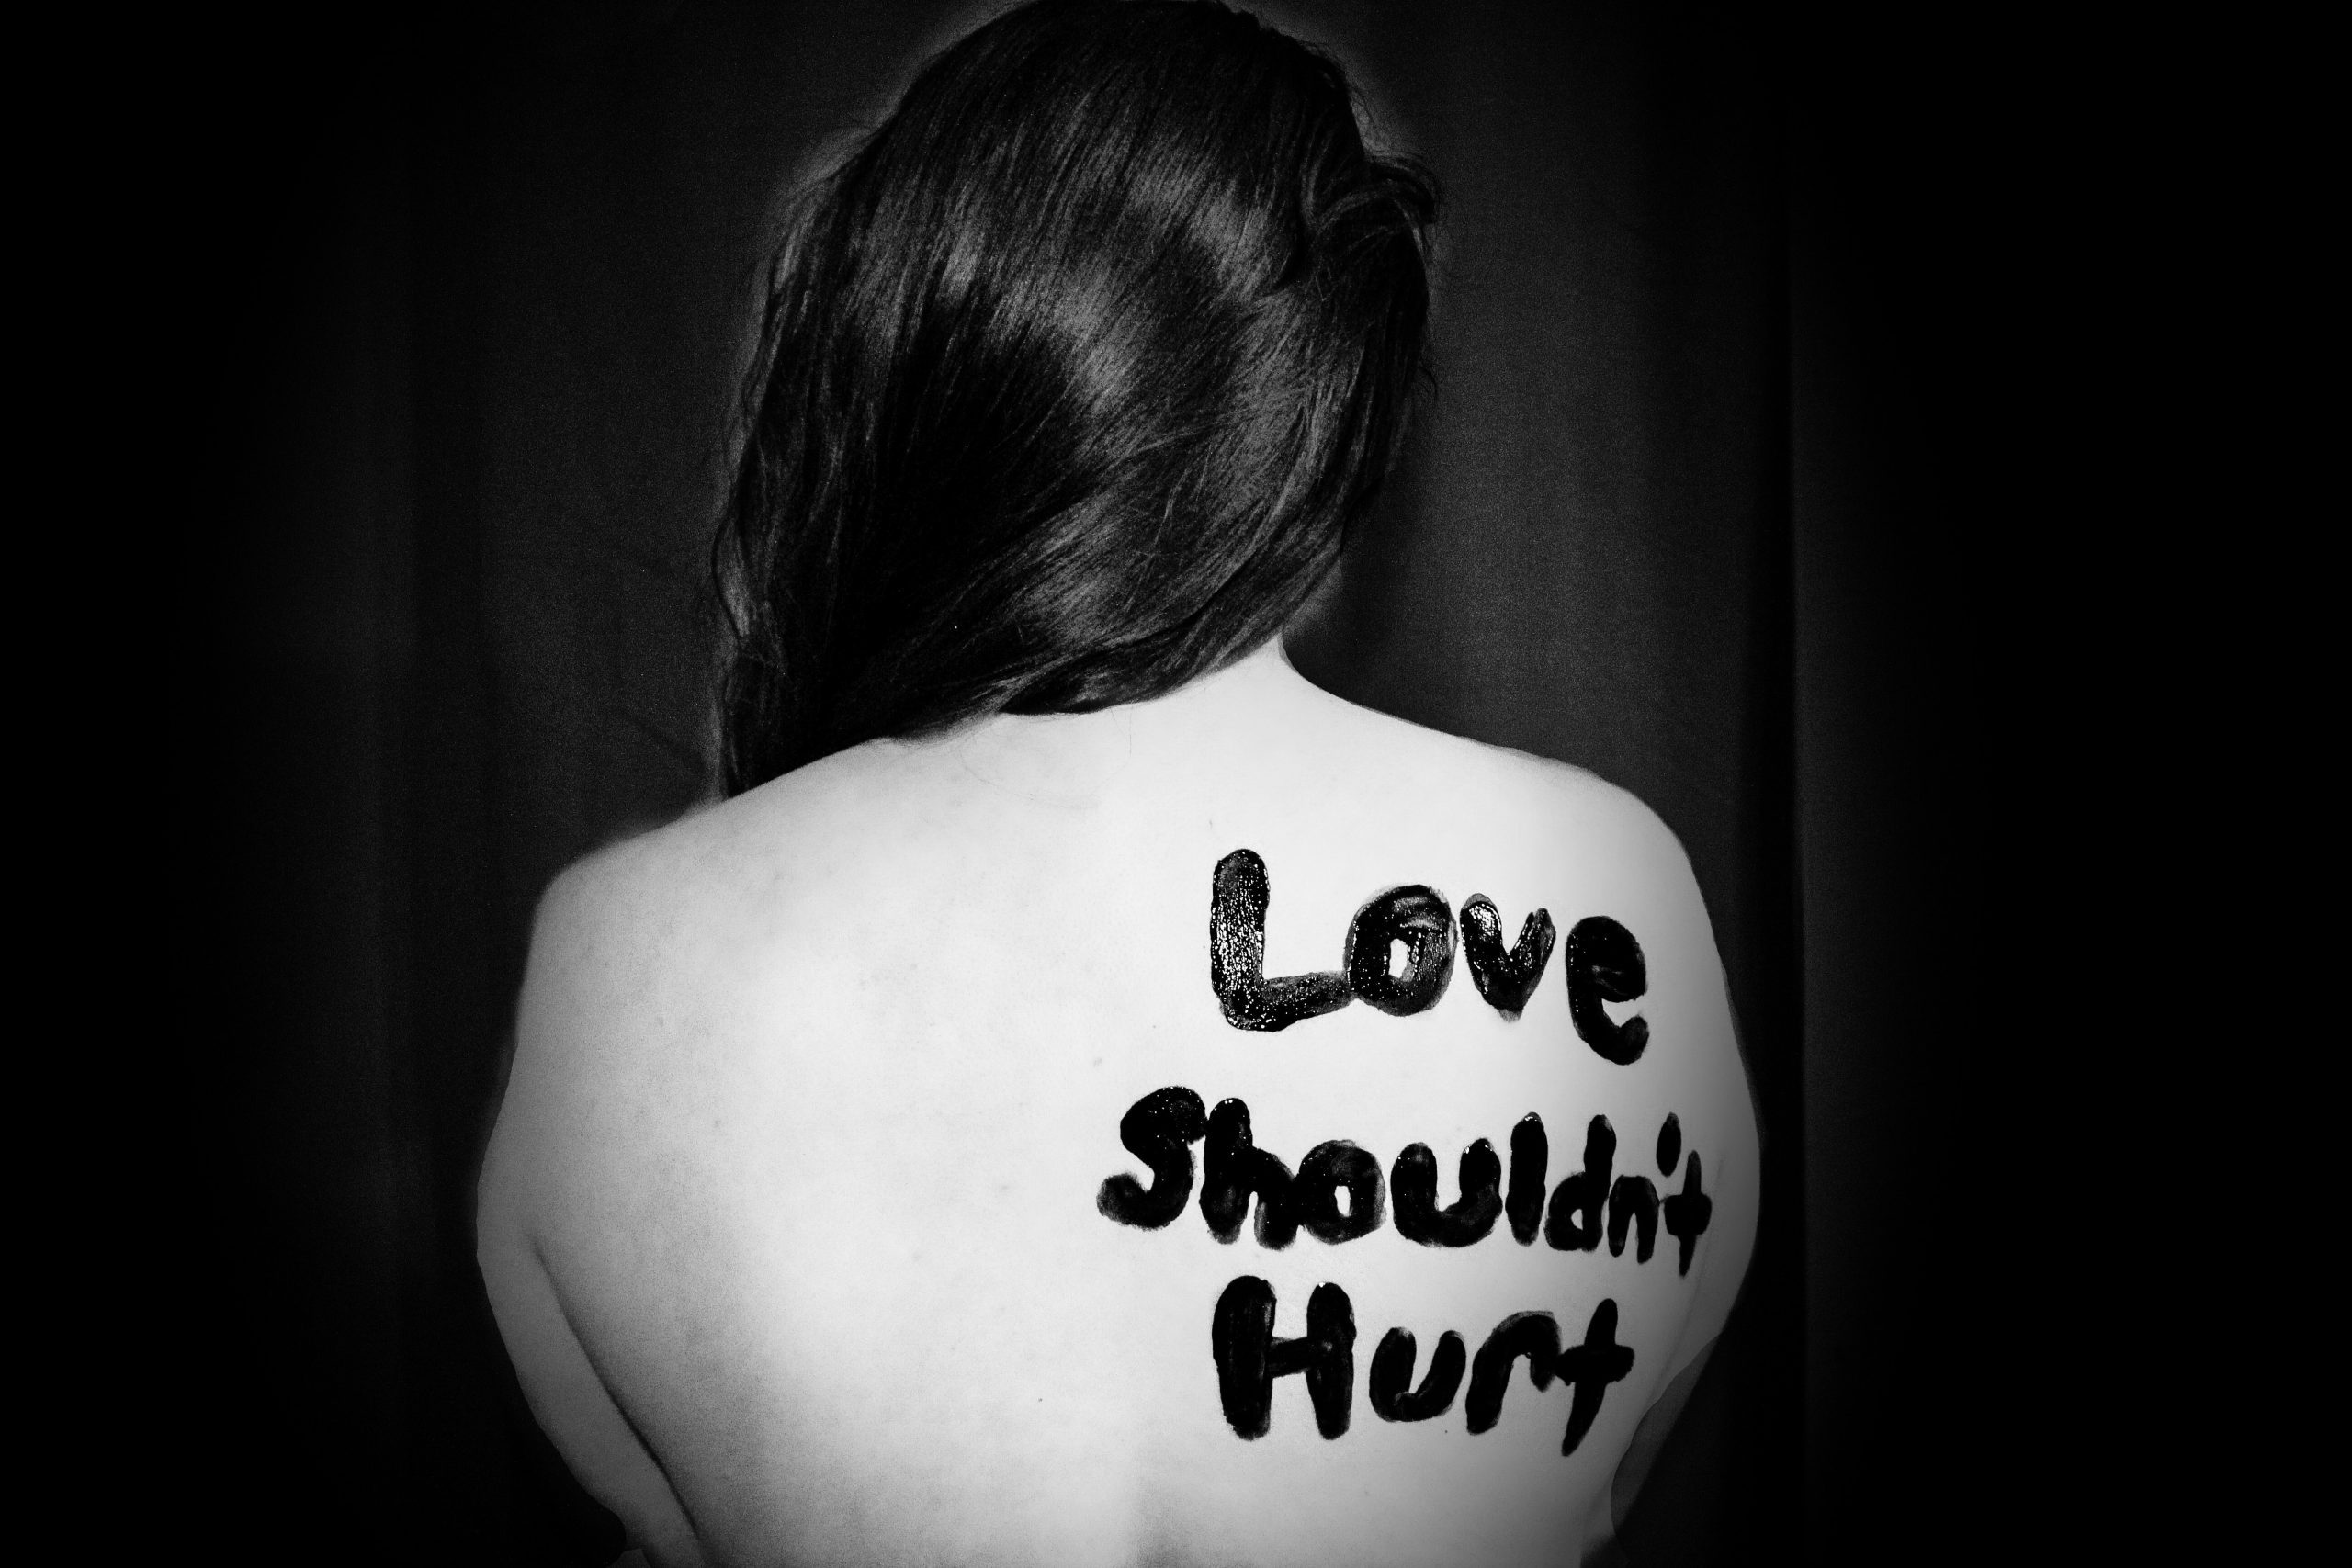 This image is a black and white photo of a woman with a bare back with the phrase "Love shouldn't hurt".